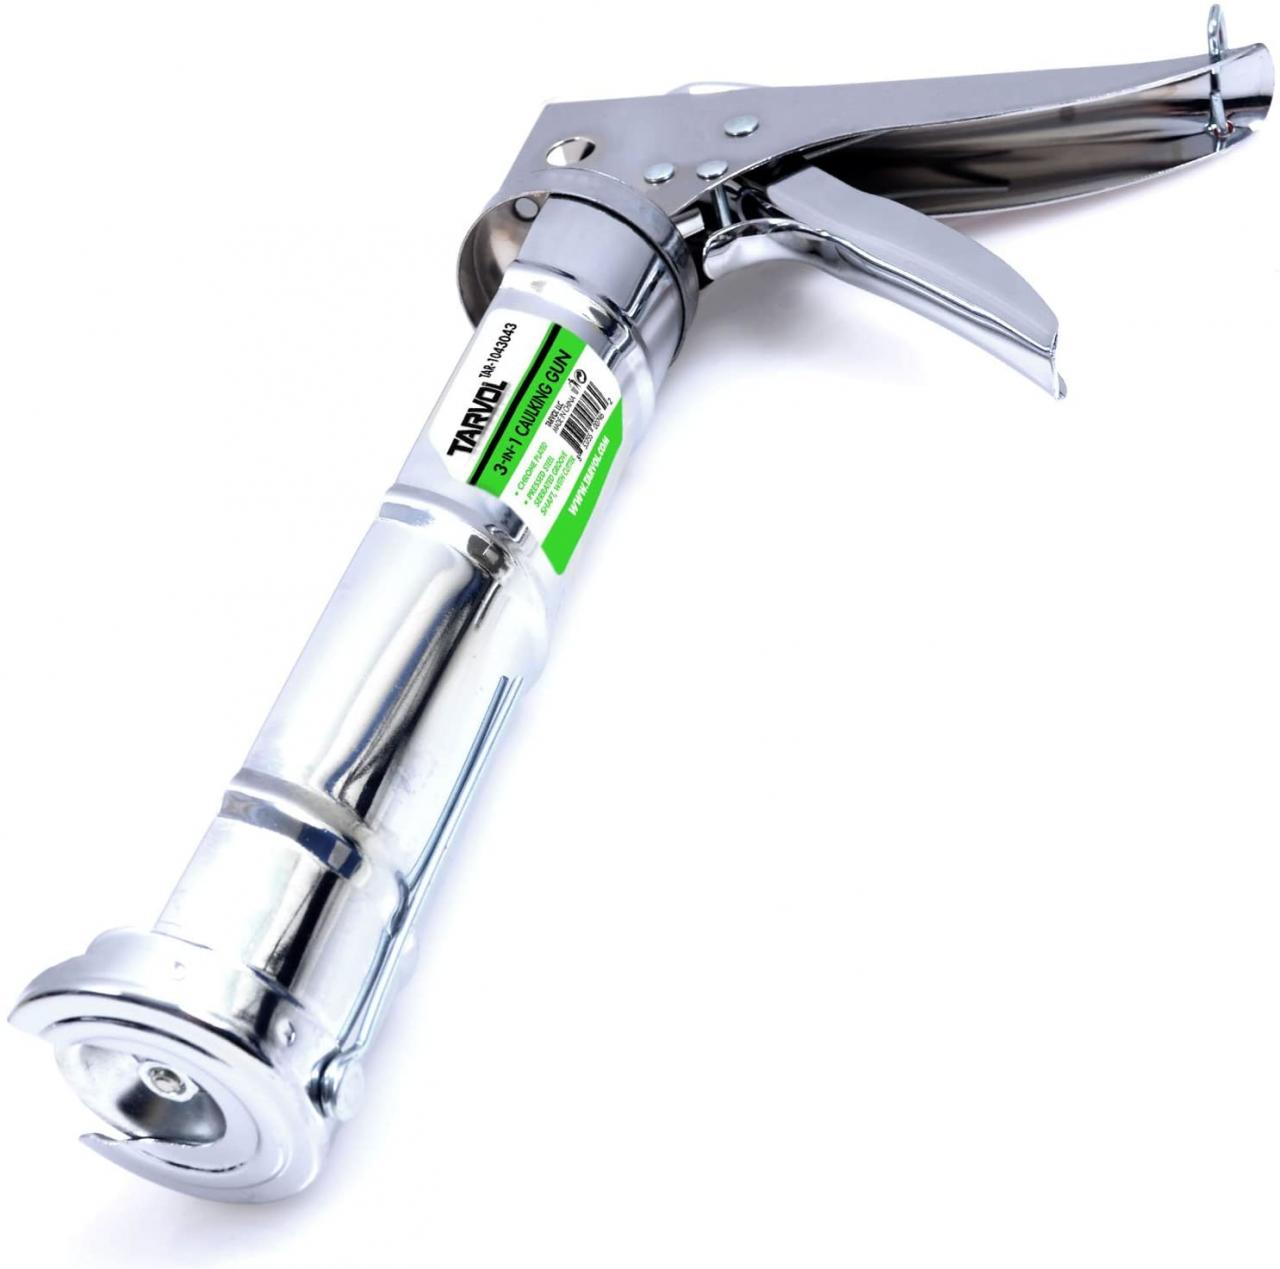 Buy 3 in 1 Caulking Gun (HEAVY DUTY CHROME PLATED) Fits Standard Size 10oz  Caulk - Refillable 3 in 1 Design Includes Built in Cutter and Puncher Tool  - Perfect for Industrial